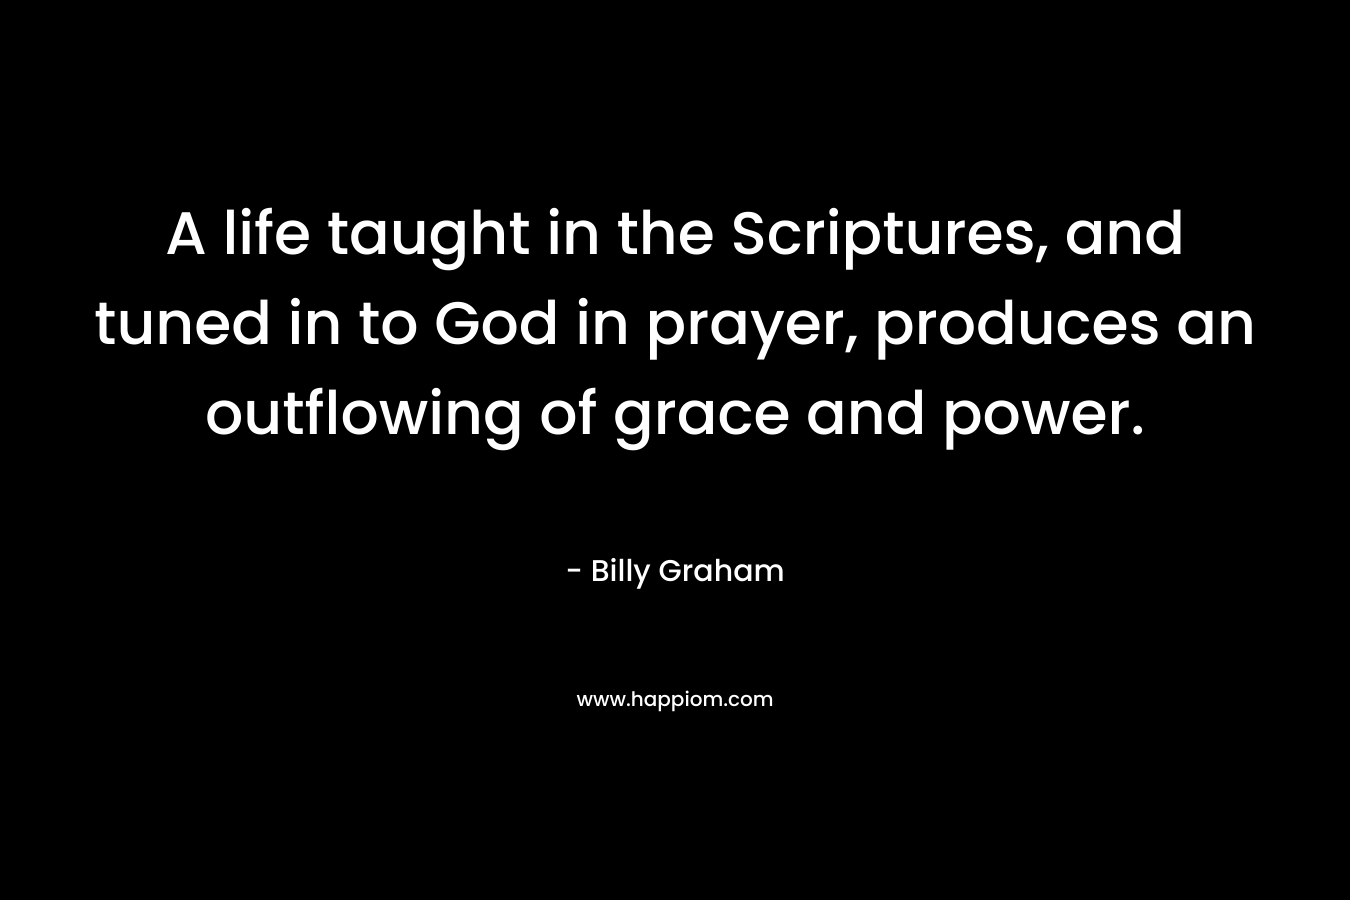 A life taught in the Scriptures, and tuned in to God in prayer, produces an outflowing of grace and power. – Billy Graham